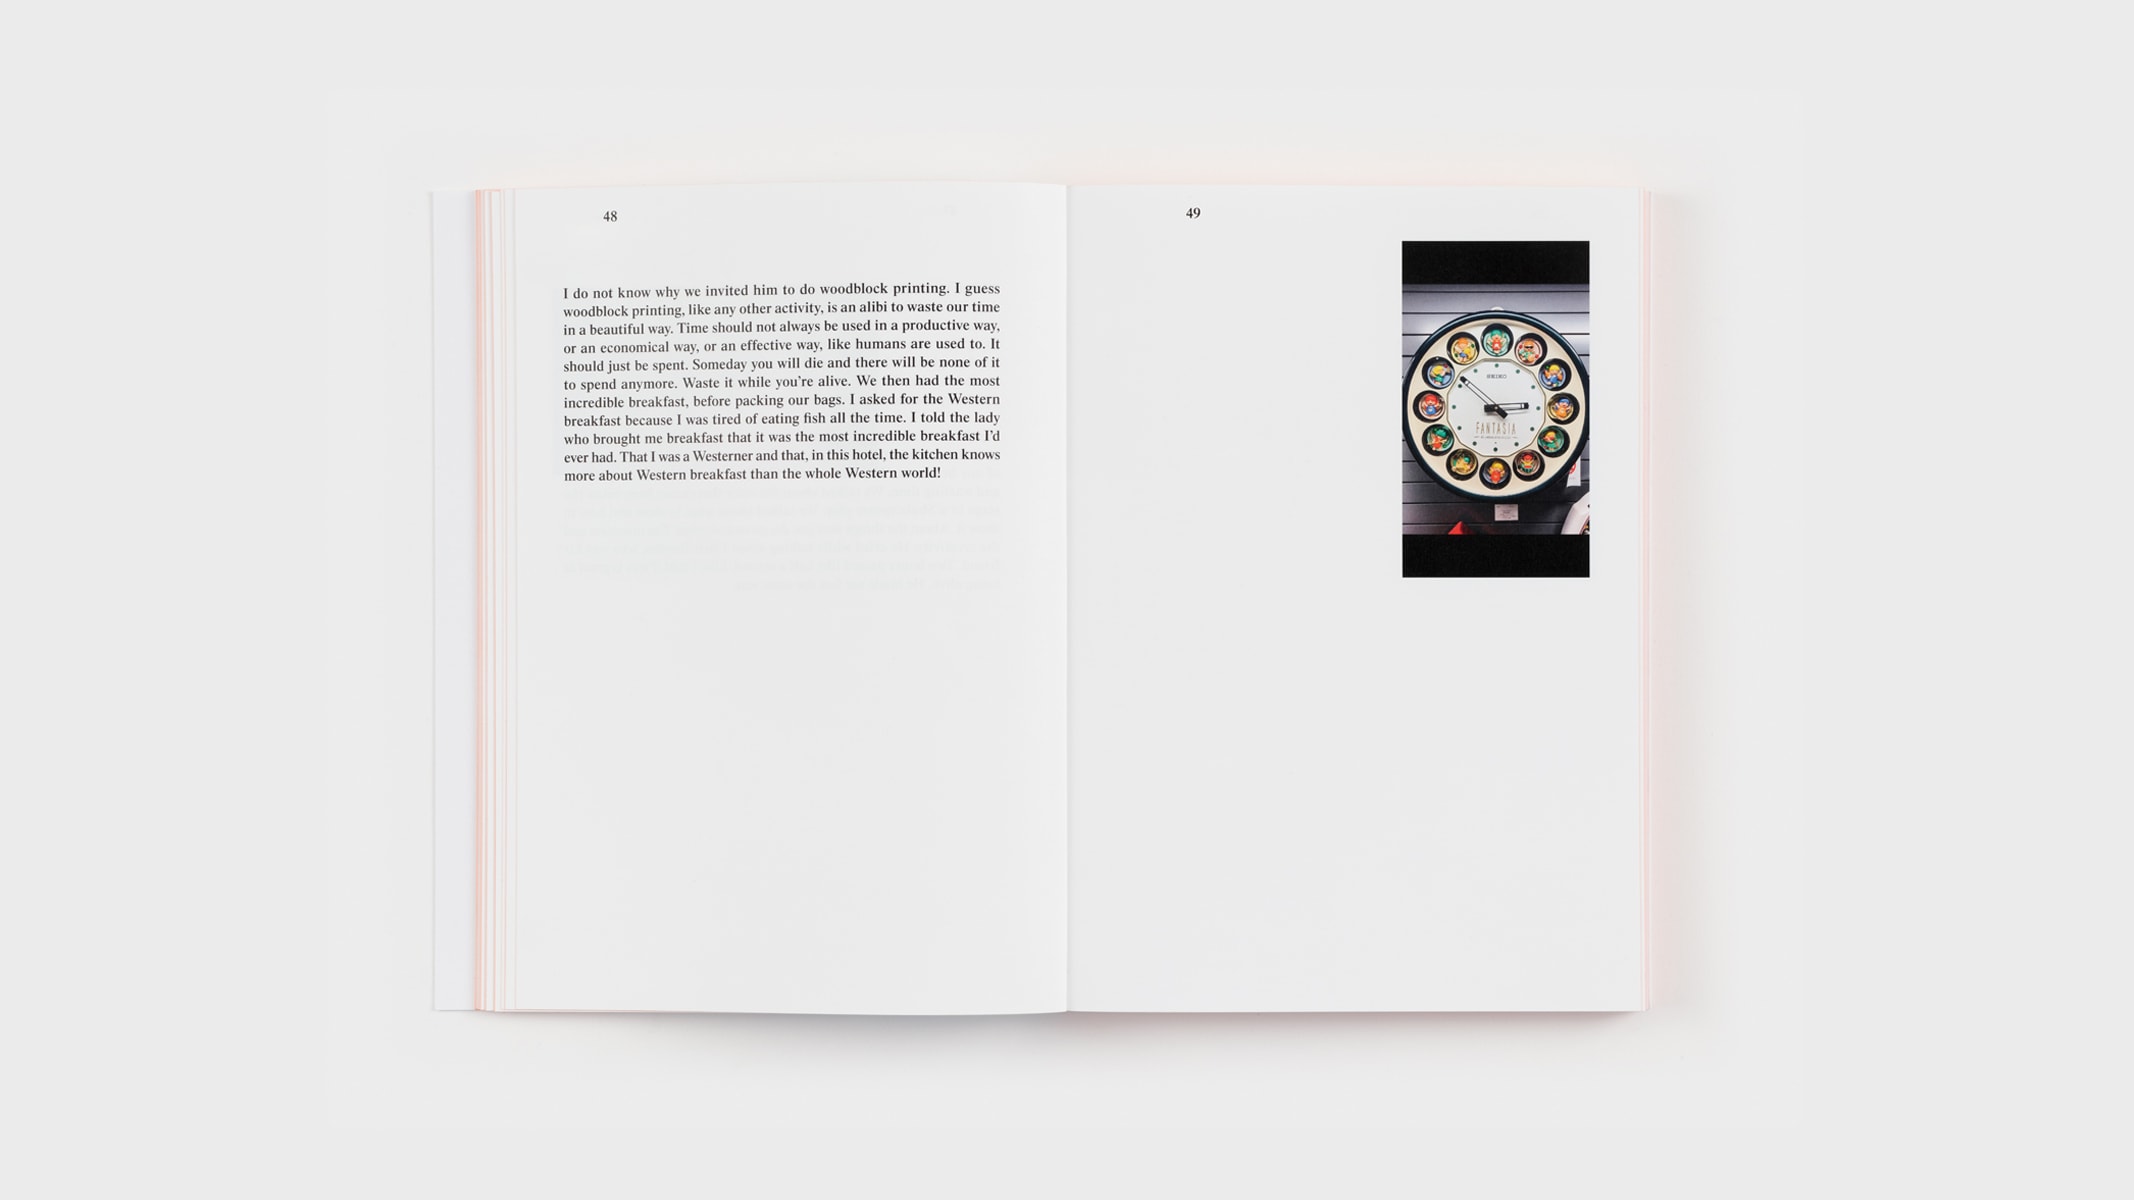 Pages at 48 and 49. Here too, Harold's entry is short, occupying the top third of the left-hand page. On the right lies a photo of a colorful analog clock reading 2:52. 